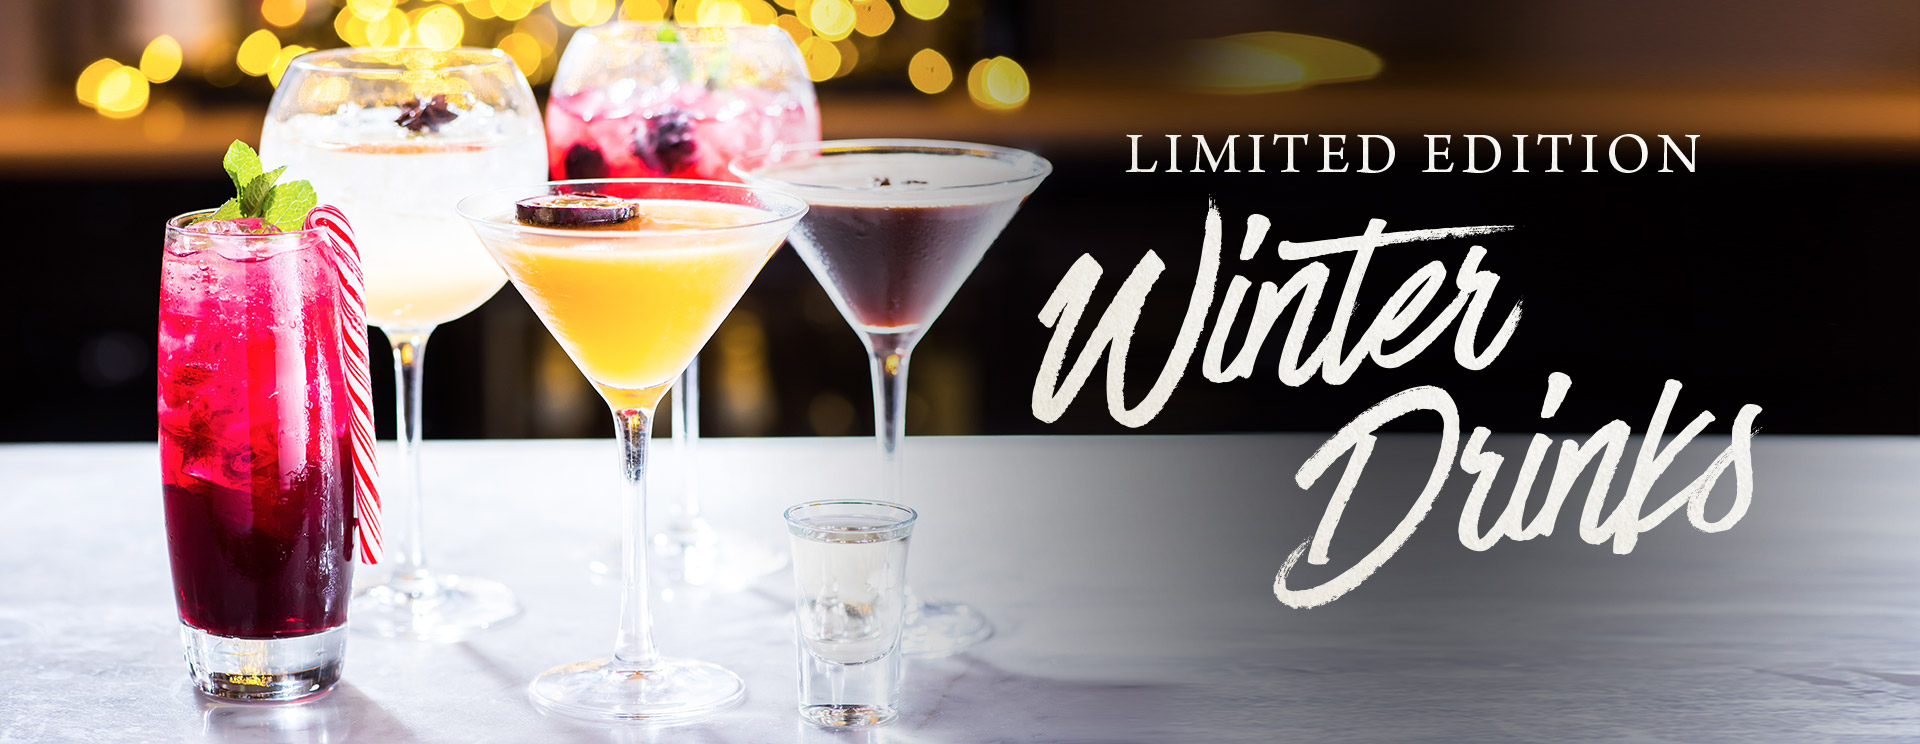 Winter cocktails and long drinks at The Saxon Mill